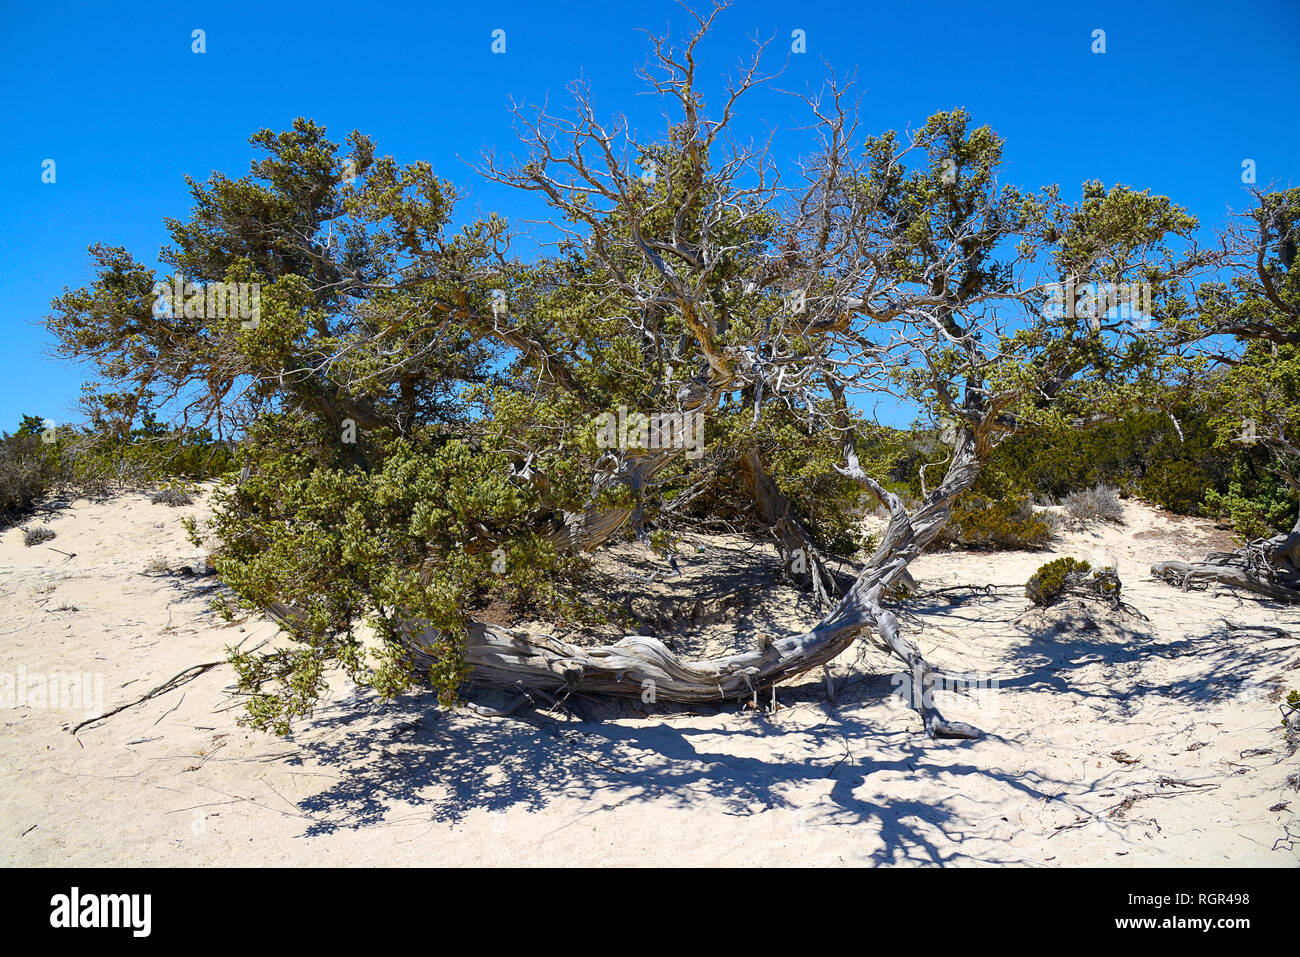 curved branched juniper tree, semi-dry, grows out of sand, near the green bushes Stock Photo